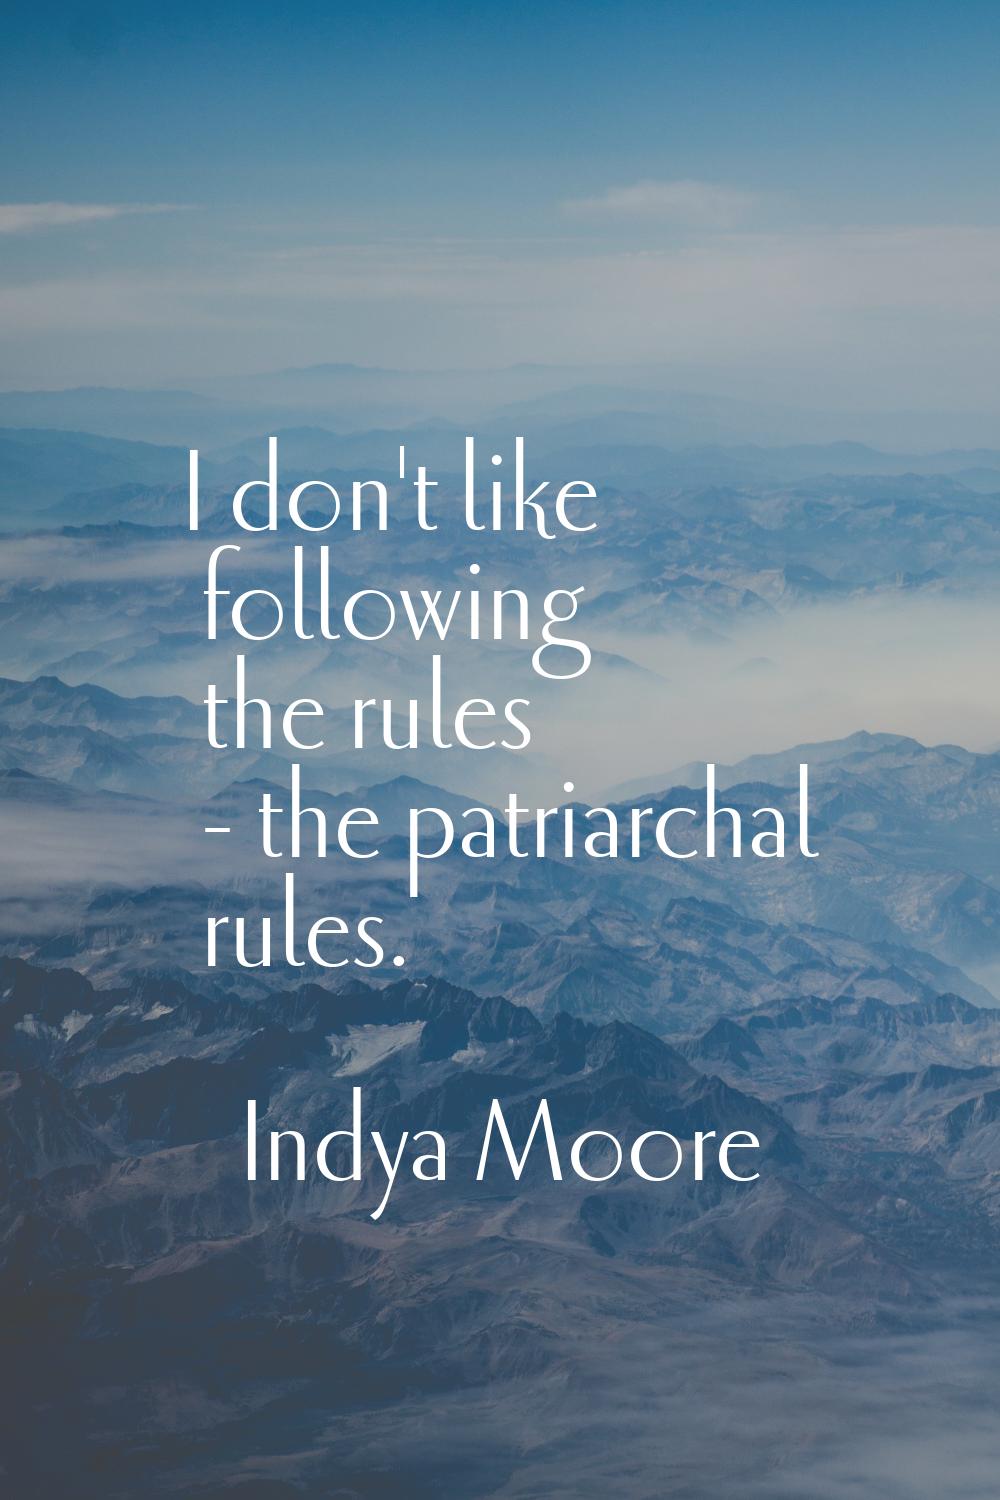 I don't like following the rules - the patriarchal rules.